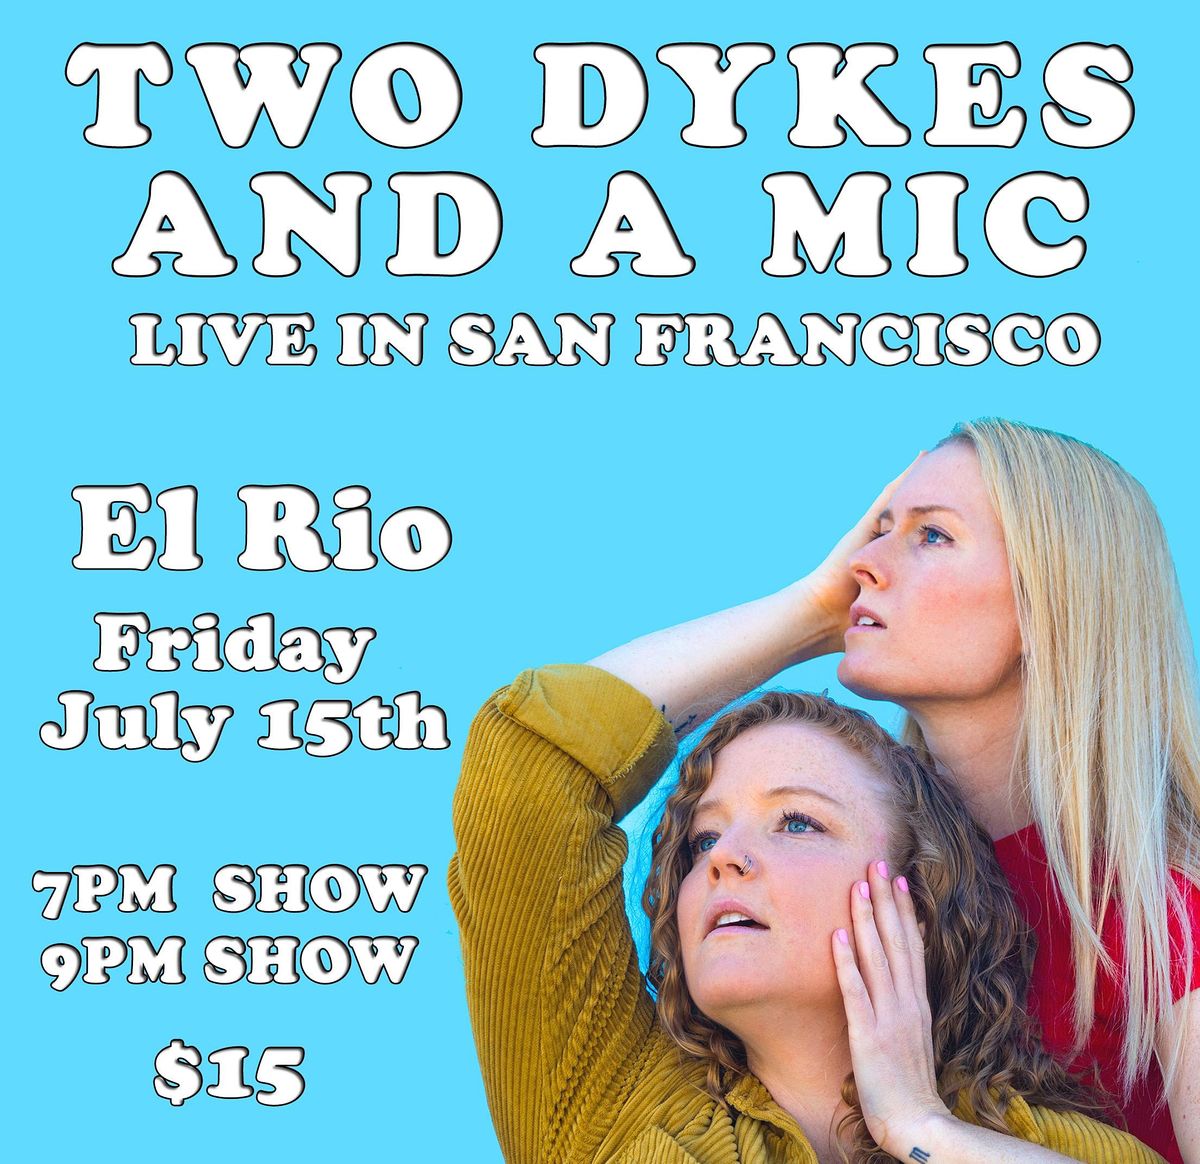 Two Dykes and a Mic - Live - San Francisco (EARLY SHOW)